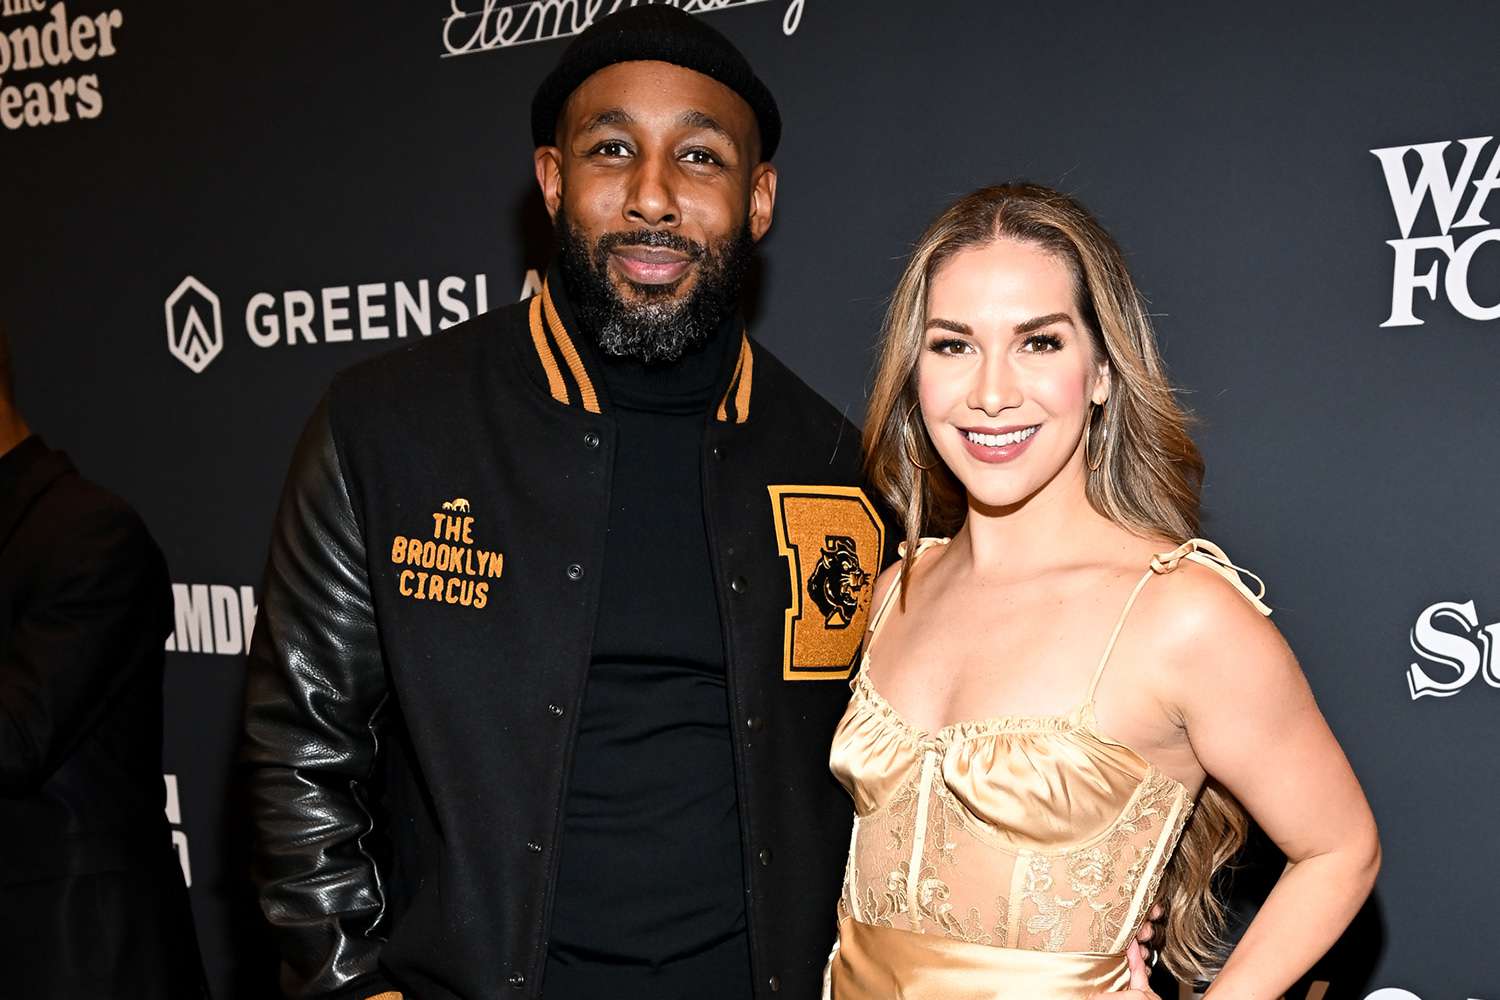 Stephen tWitch Boss and Allison Holker